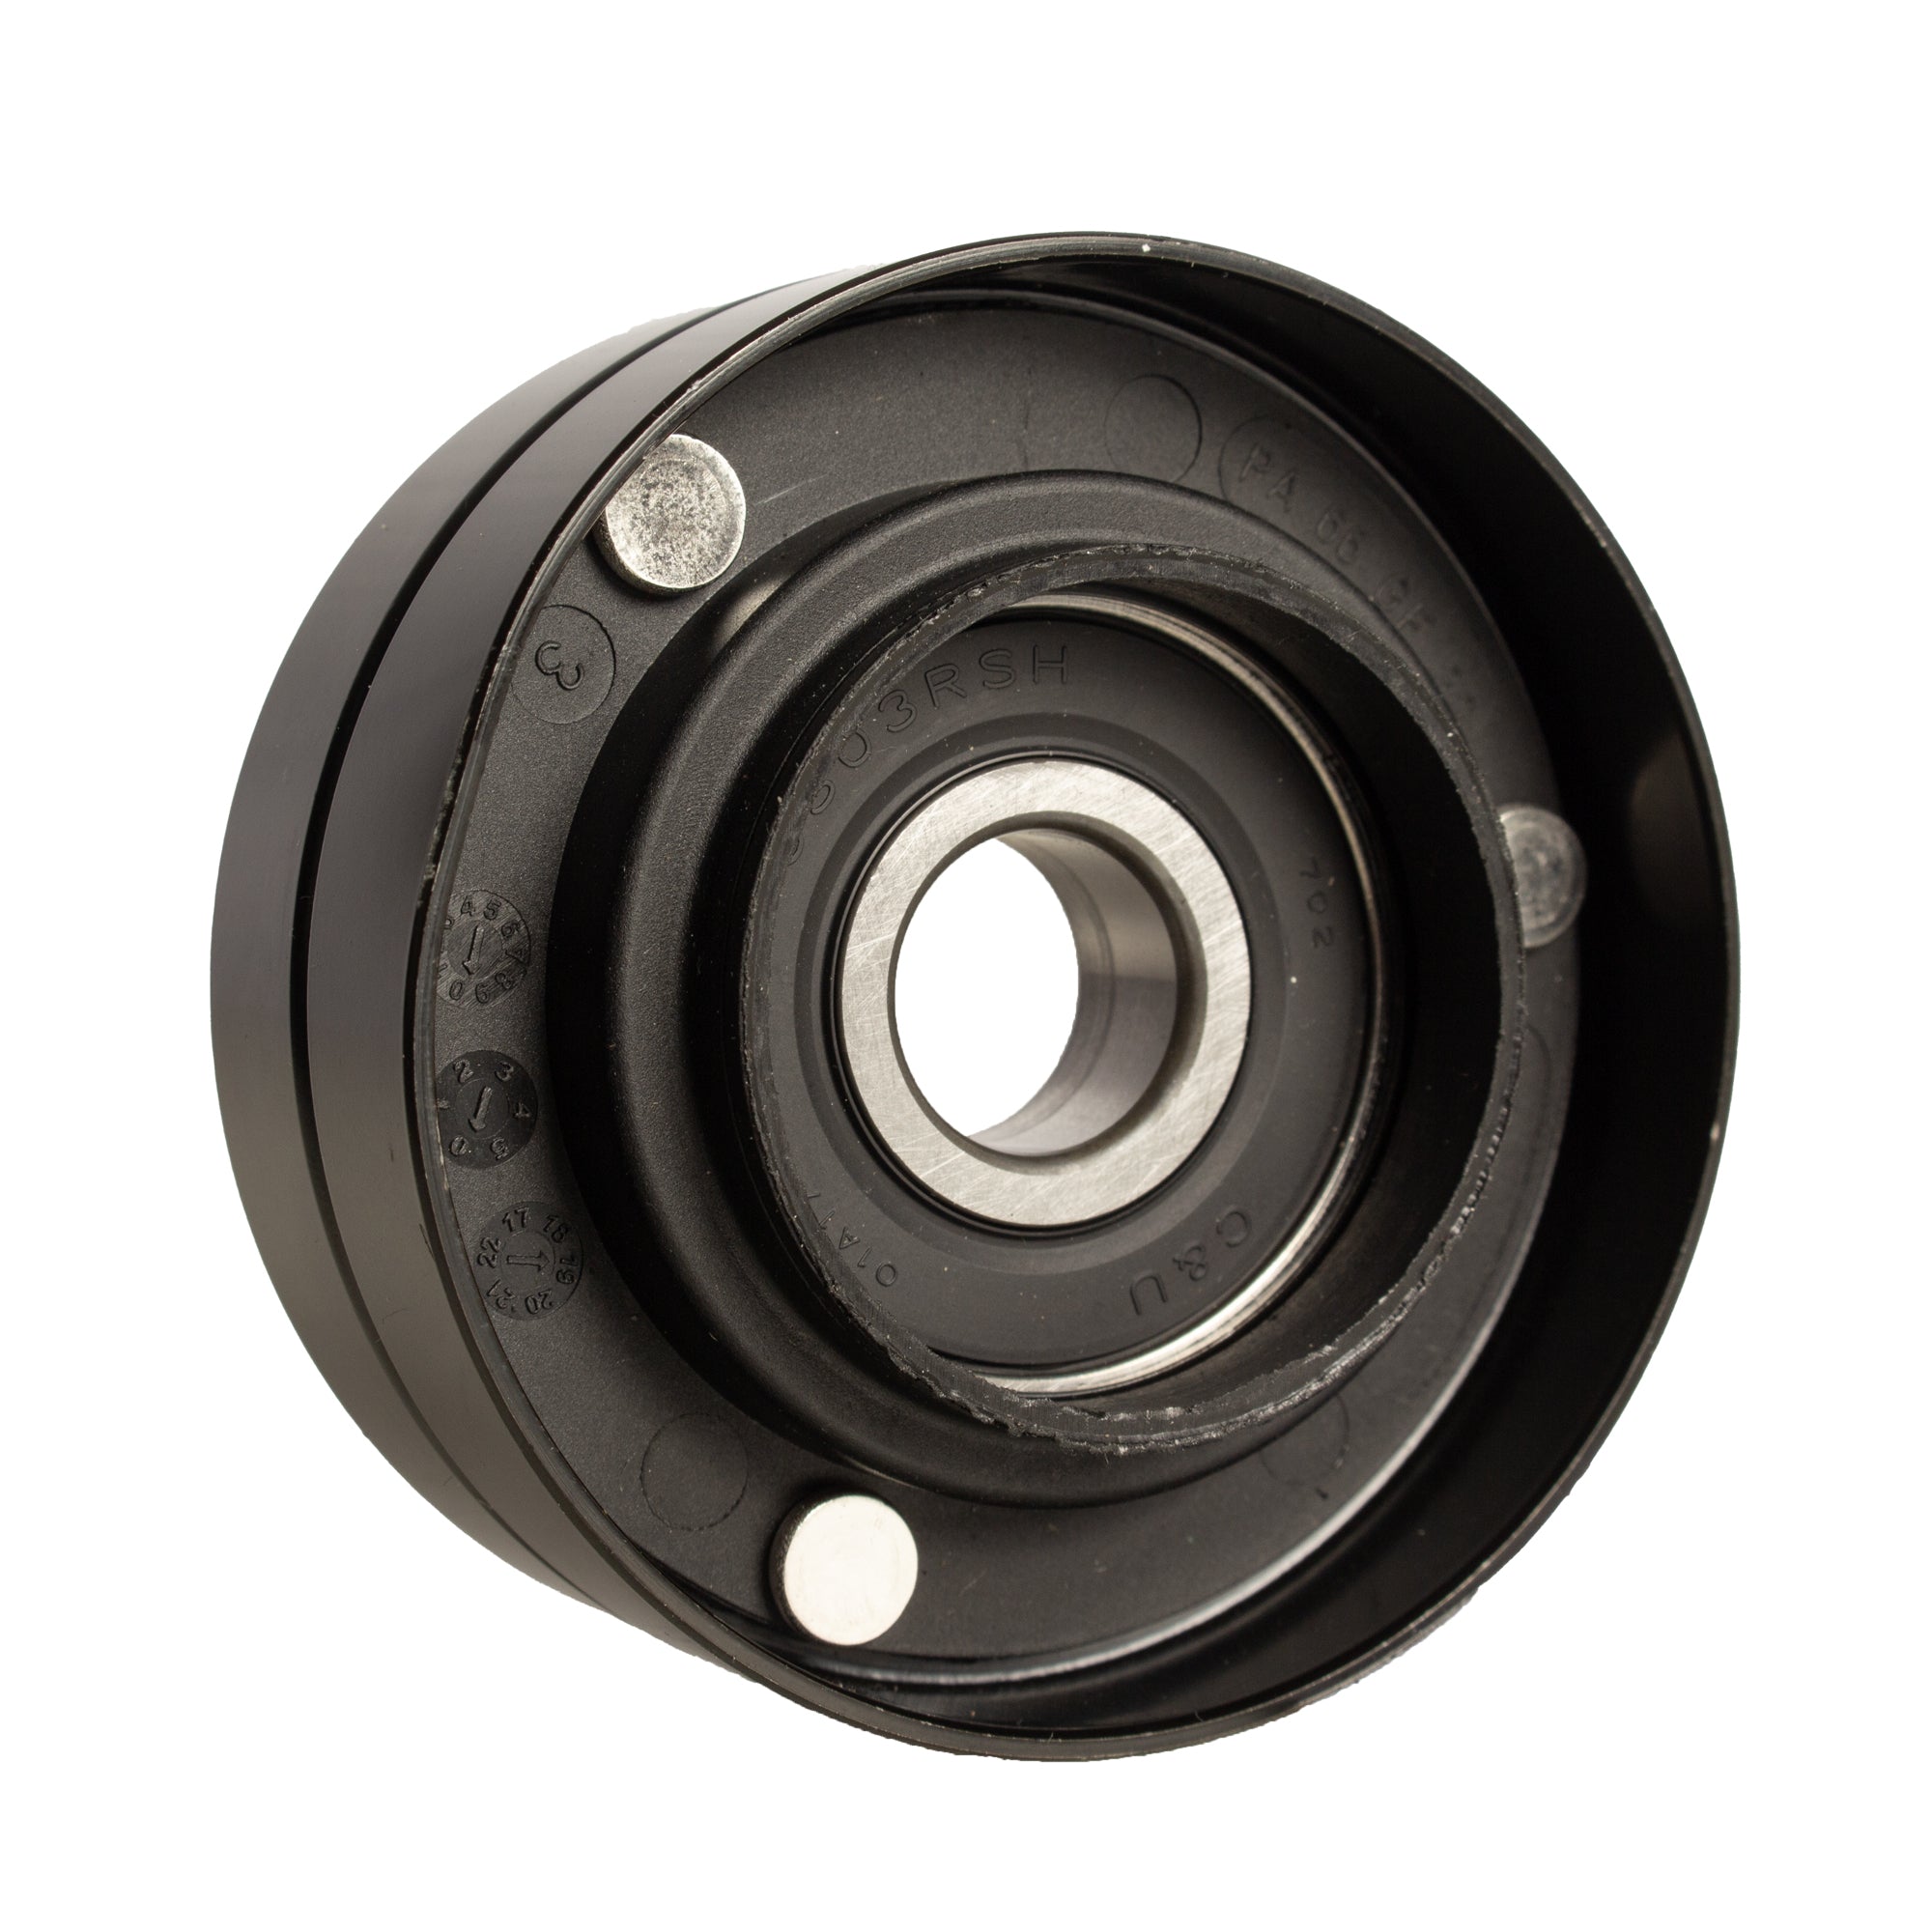 Idler Pulley Replacement for JOHN DEERE 1564 2154 5100 6020 AL157596